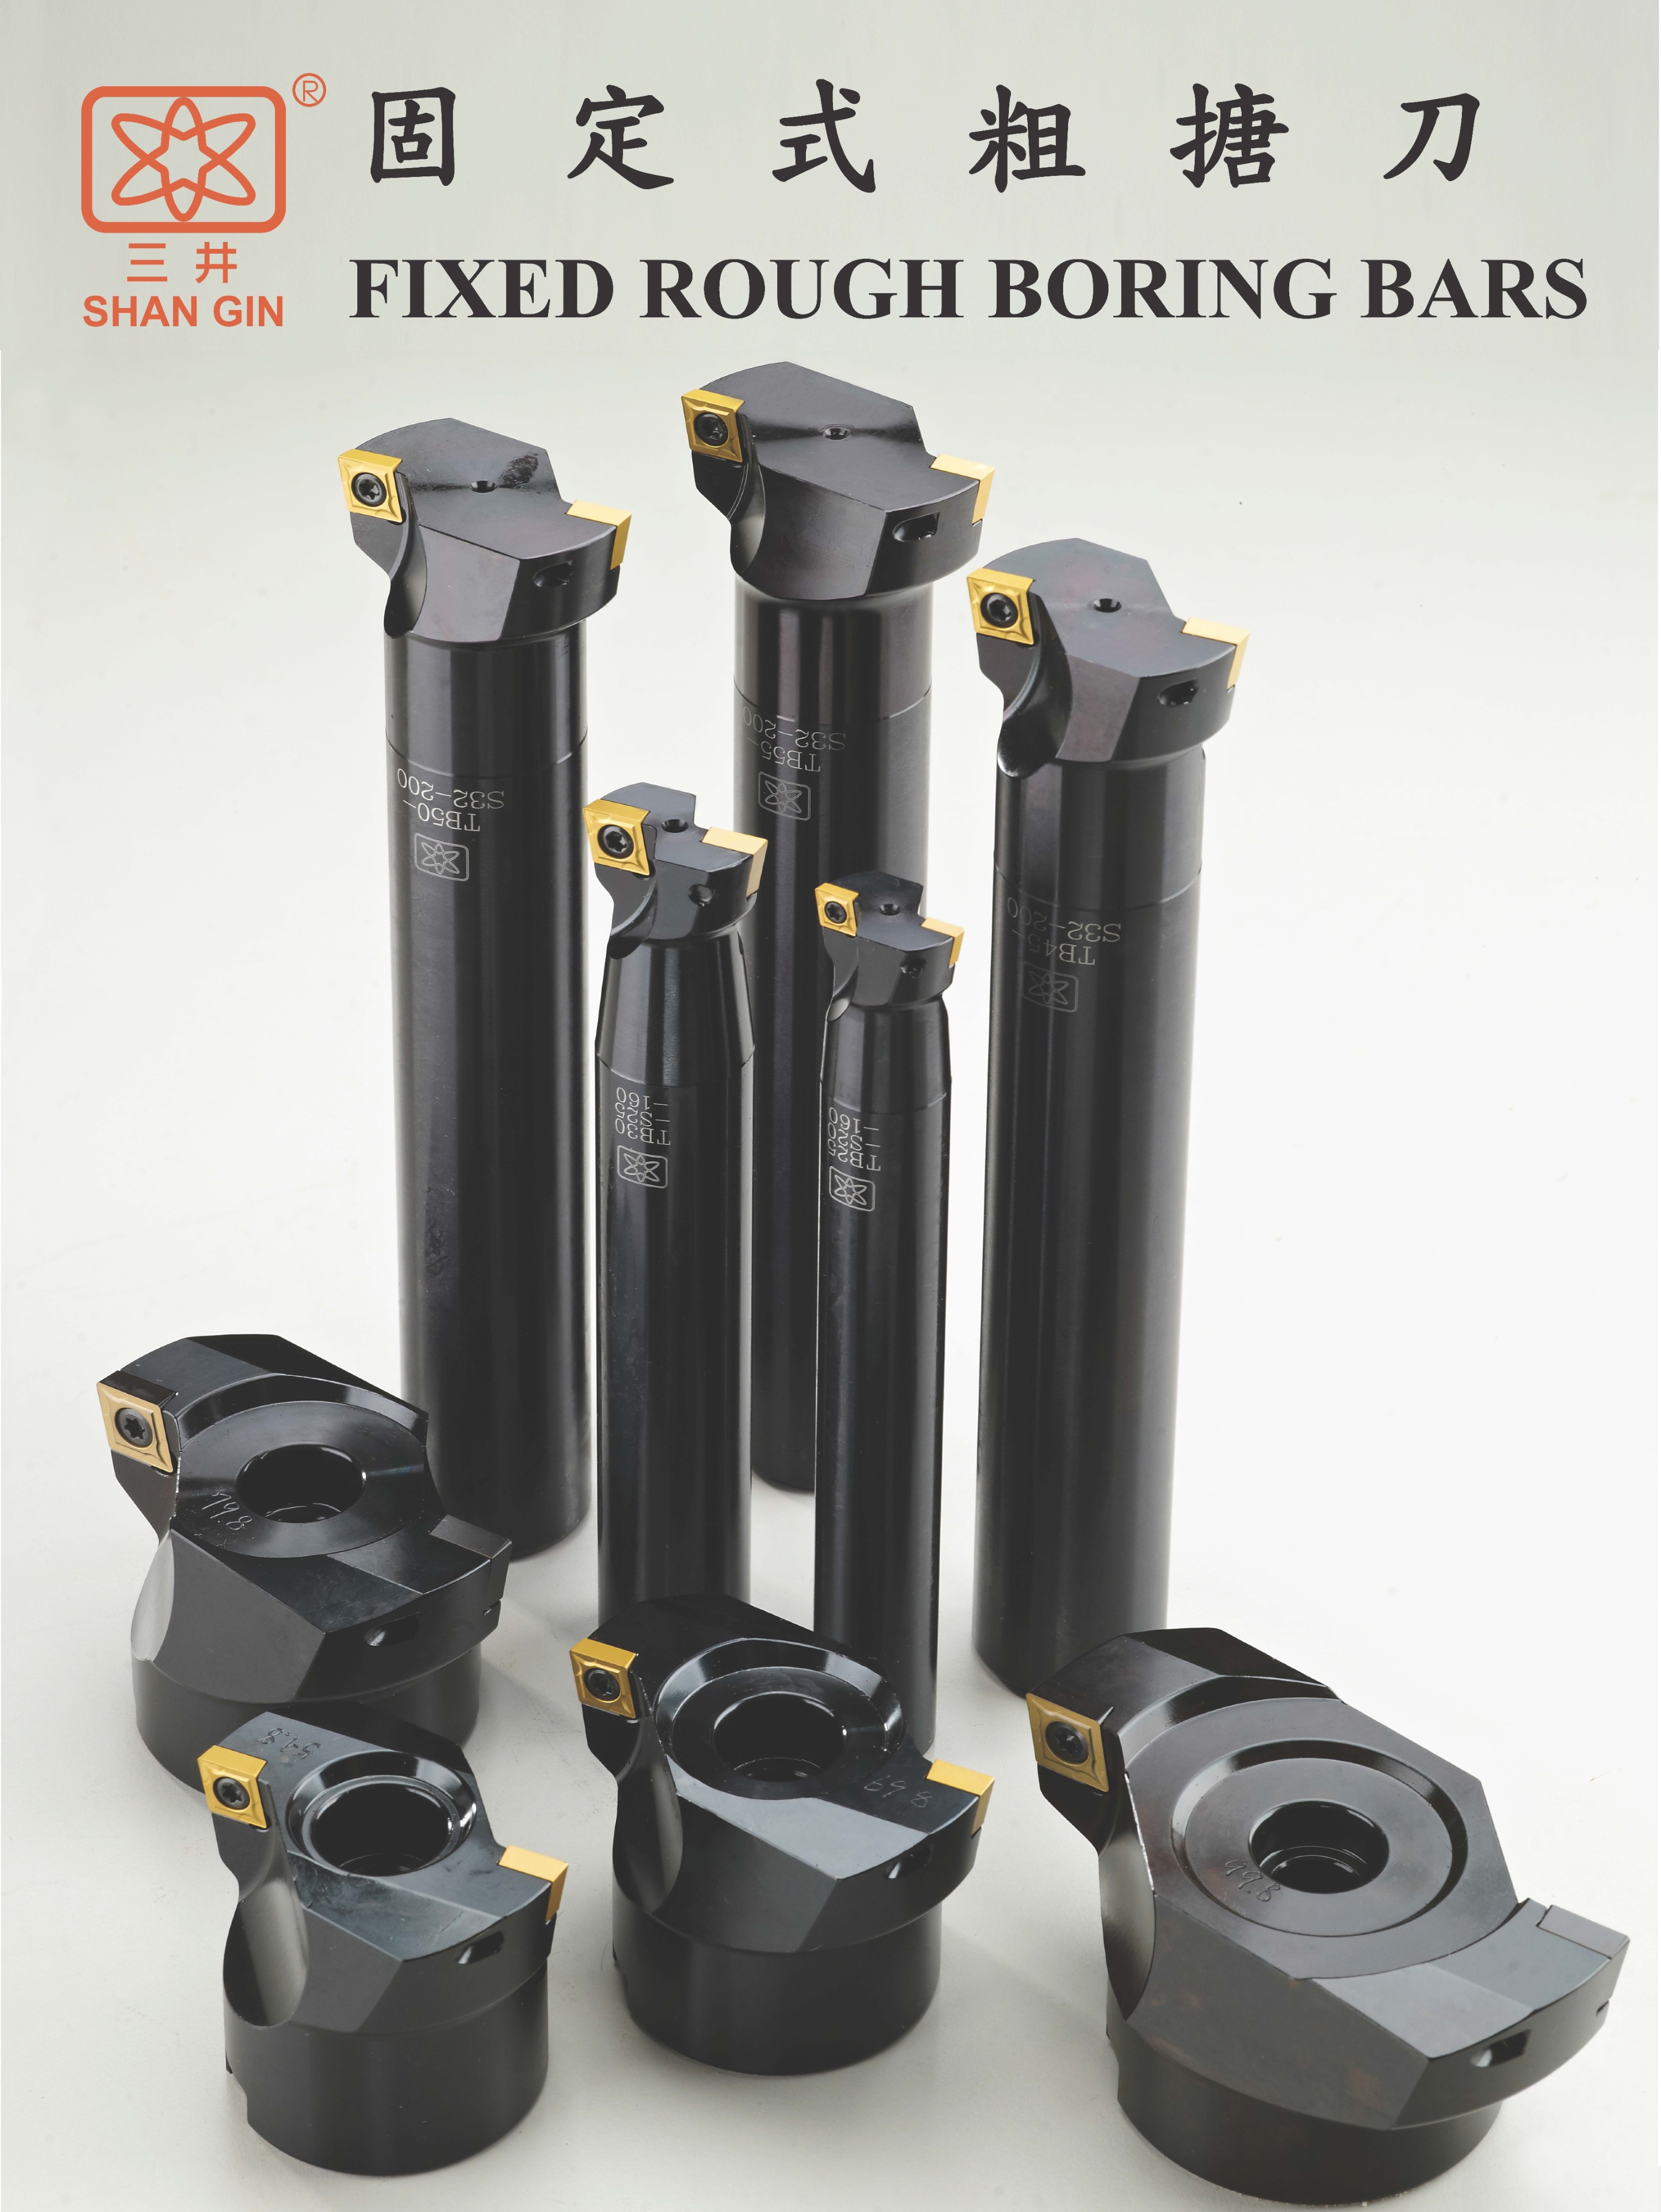 Products|FIXED ROUGH BORING BARS